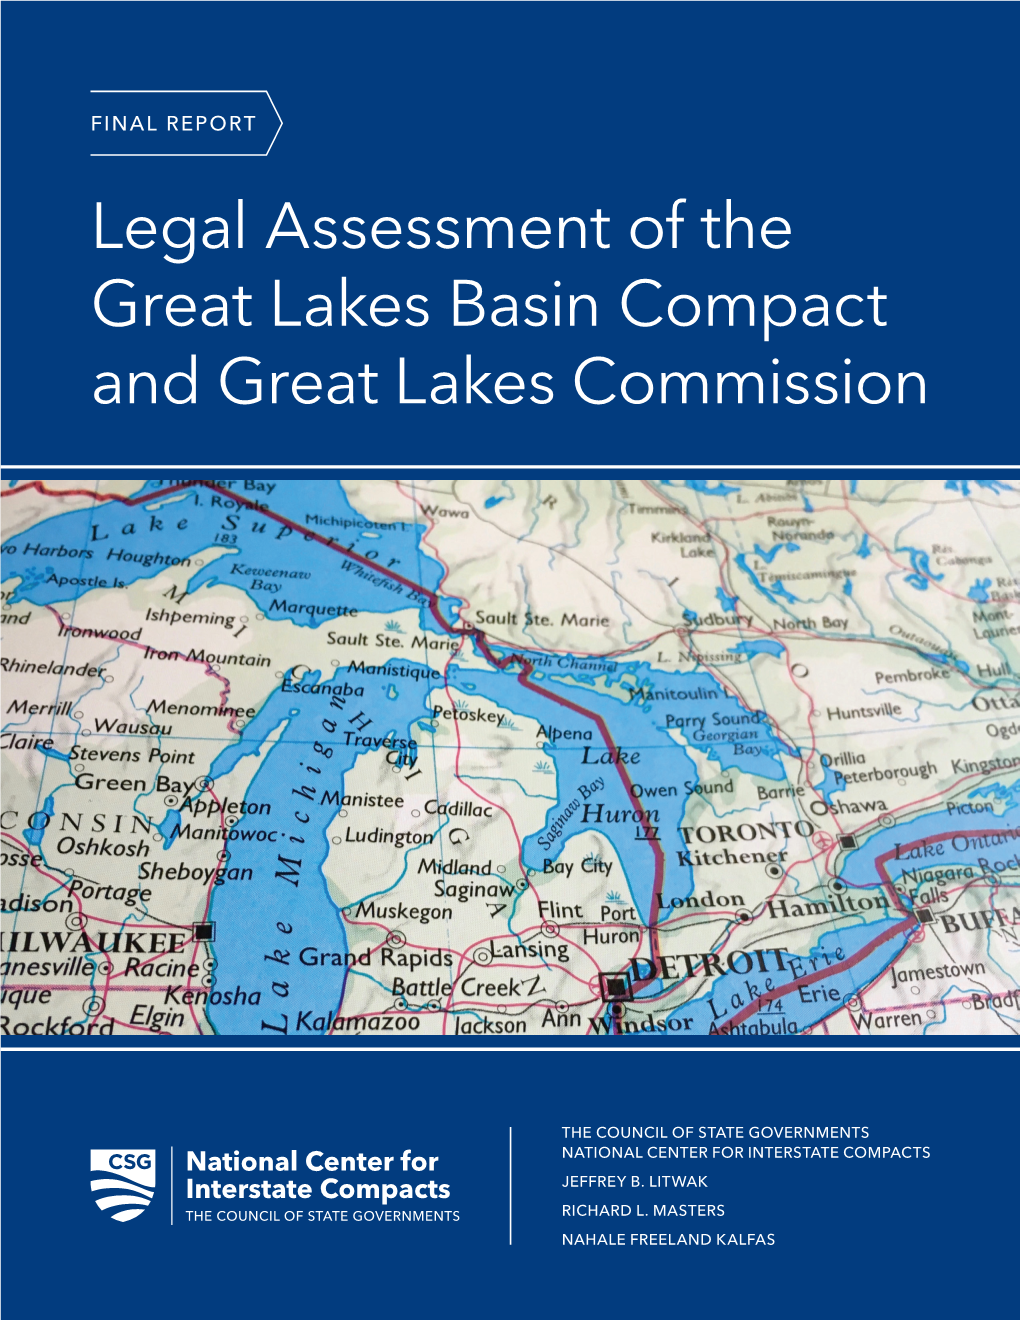 Legal Assessment of the Great Lakes Basin Compact and Great Lakes Commission